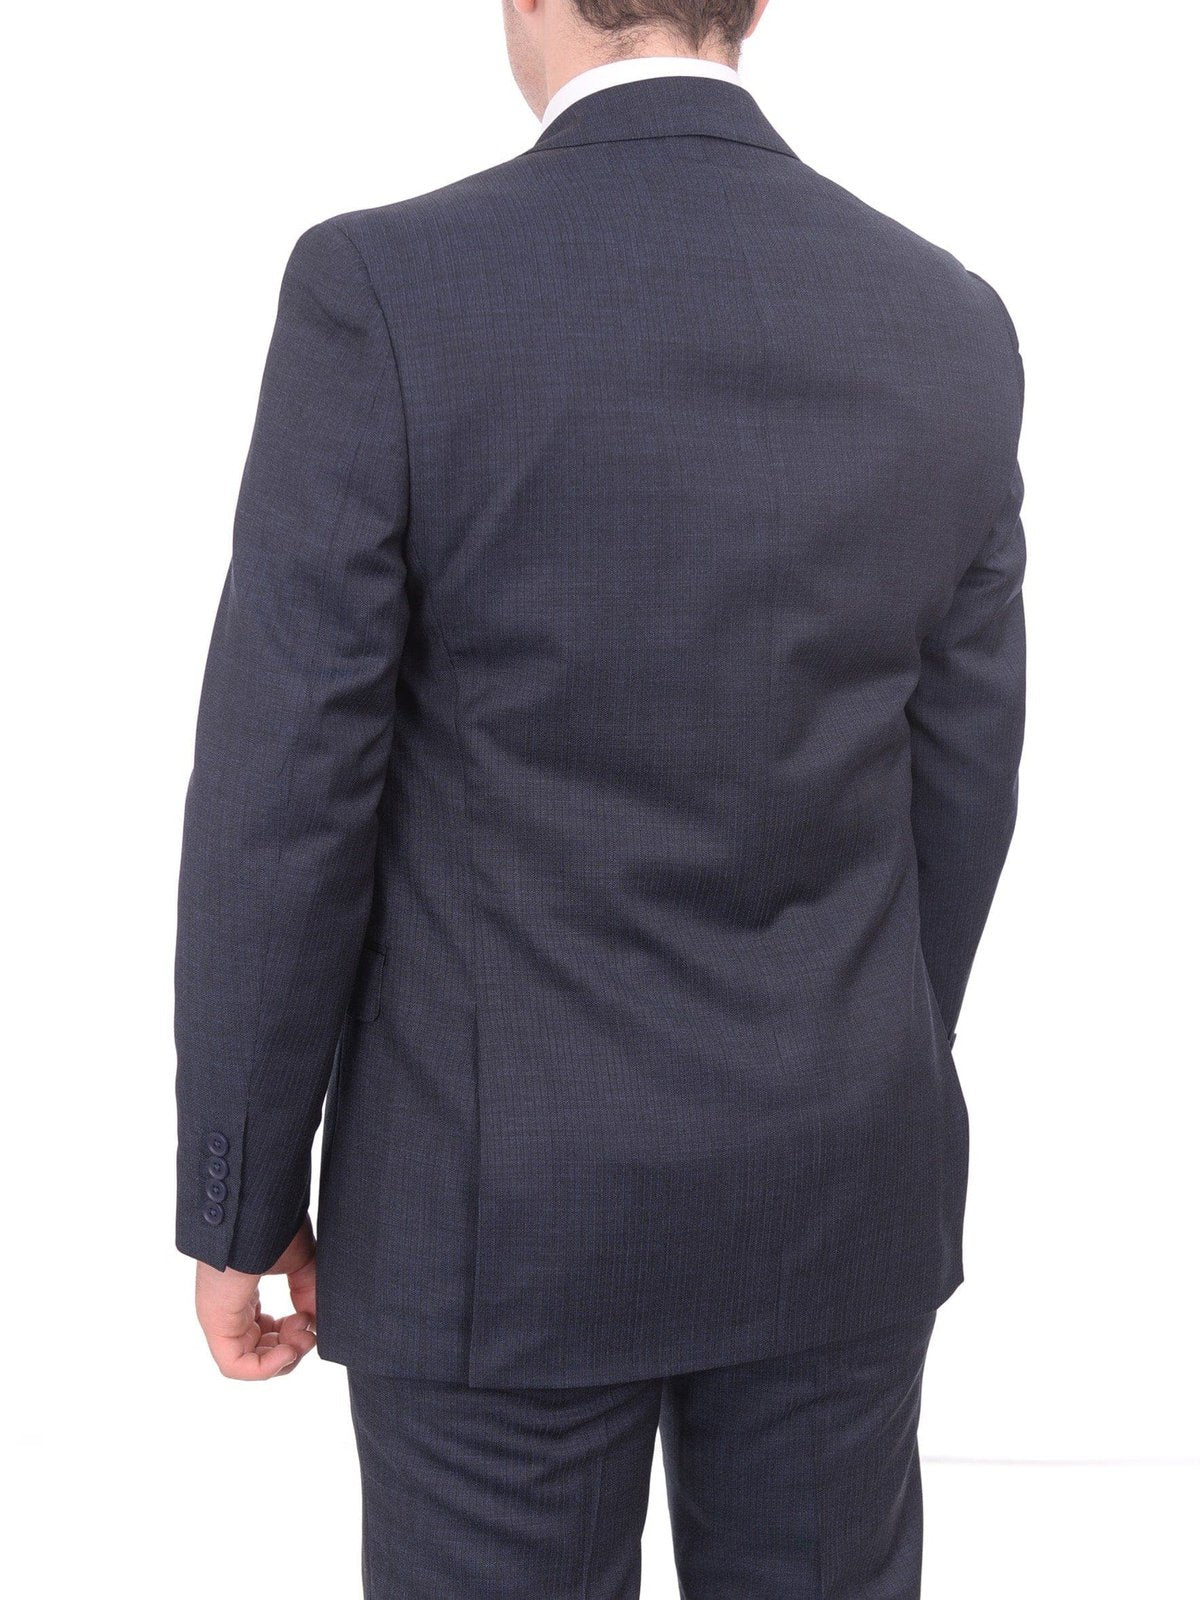 I Uomo TWO PIECE SUITS I Uomo Regular Fit Solid Blue Tonal Striped Two Button 100% Wool Men's Suit